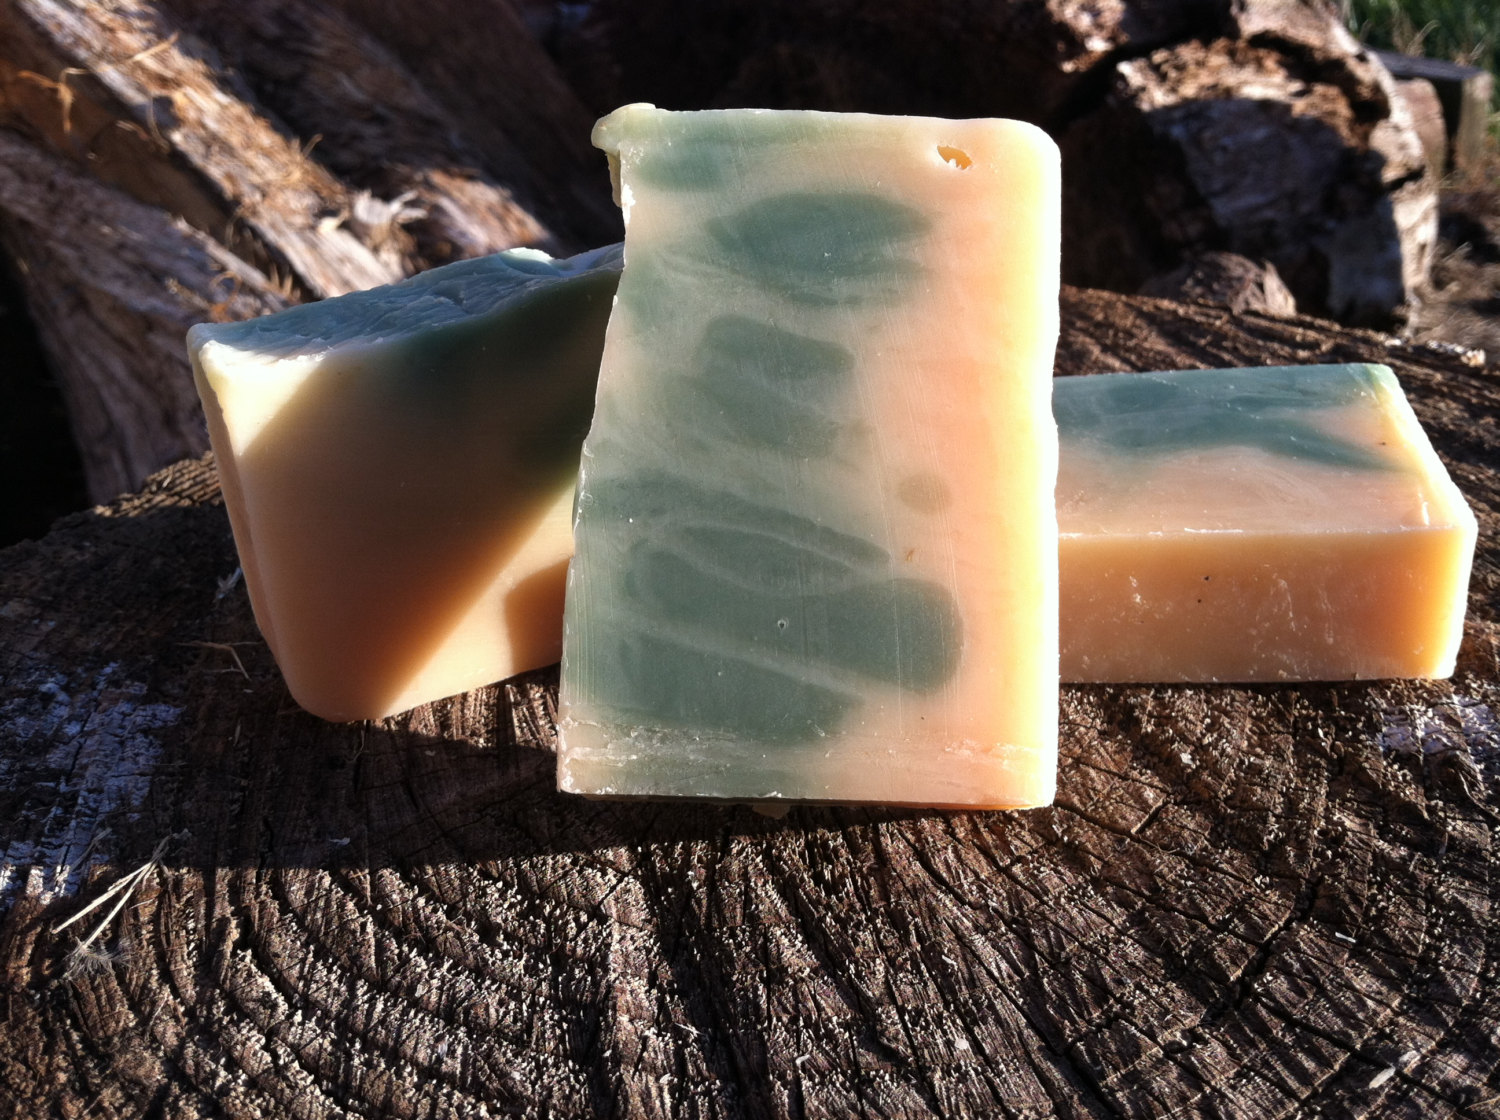 Peppermint Handcrafted Cold Pressed Soap